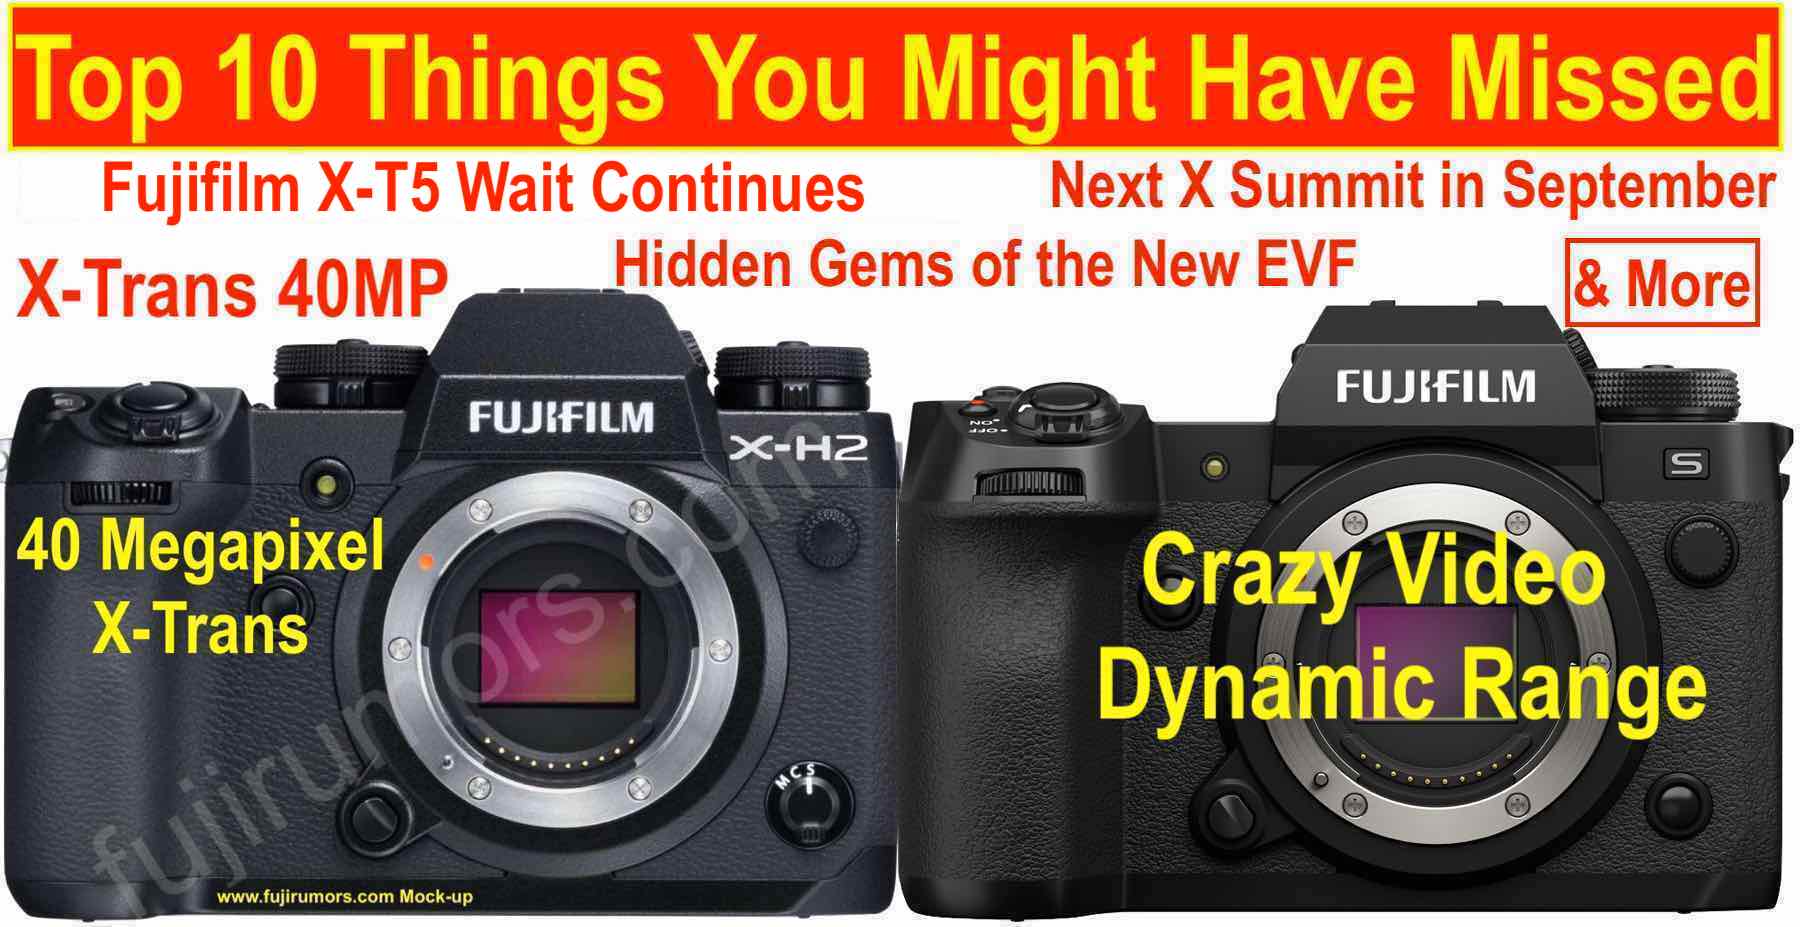 regiment tieners Vuilnisbak Fujirumors on Twitter: "10 Things You Might Have Missed: Fujifilm X-H2 40MP  X-Trans, September X Summit, Overheating Drama Ends, Crazy X-H2S Video  Dynamic Range and More https://t.co/YbMmCFYEfo https://t.co/EOFaXpTDbd" /  Twitter